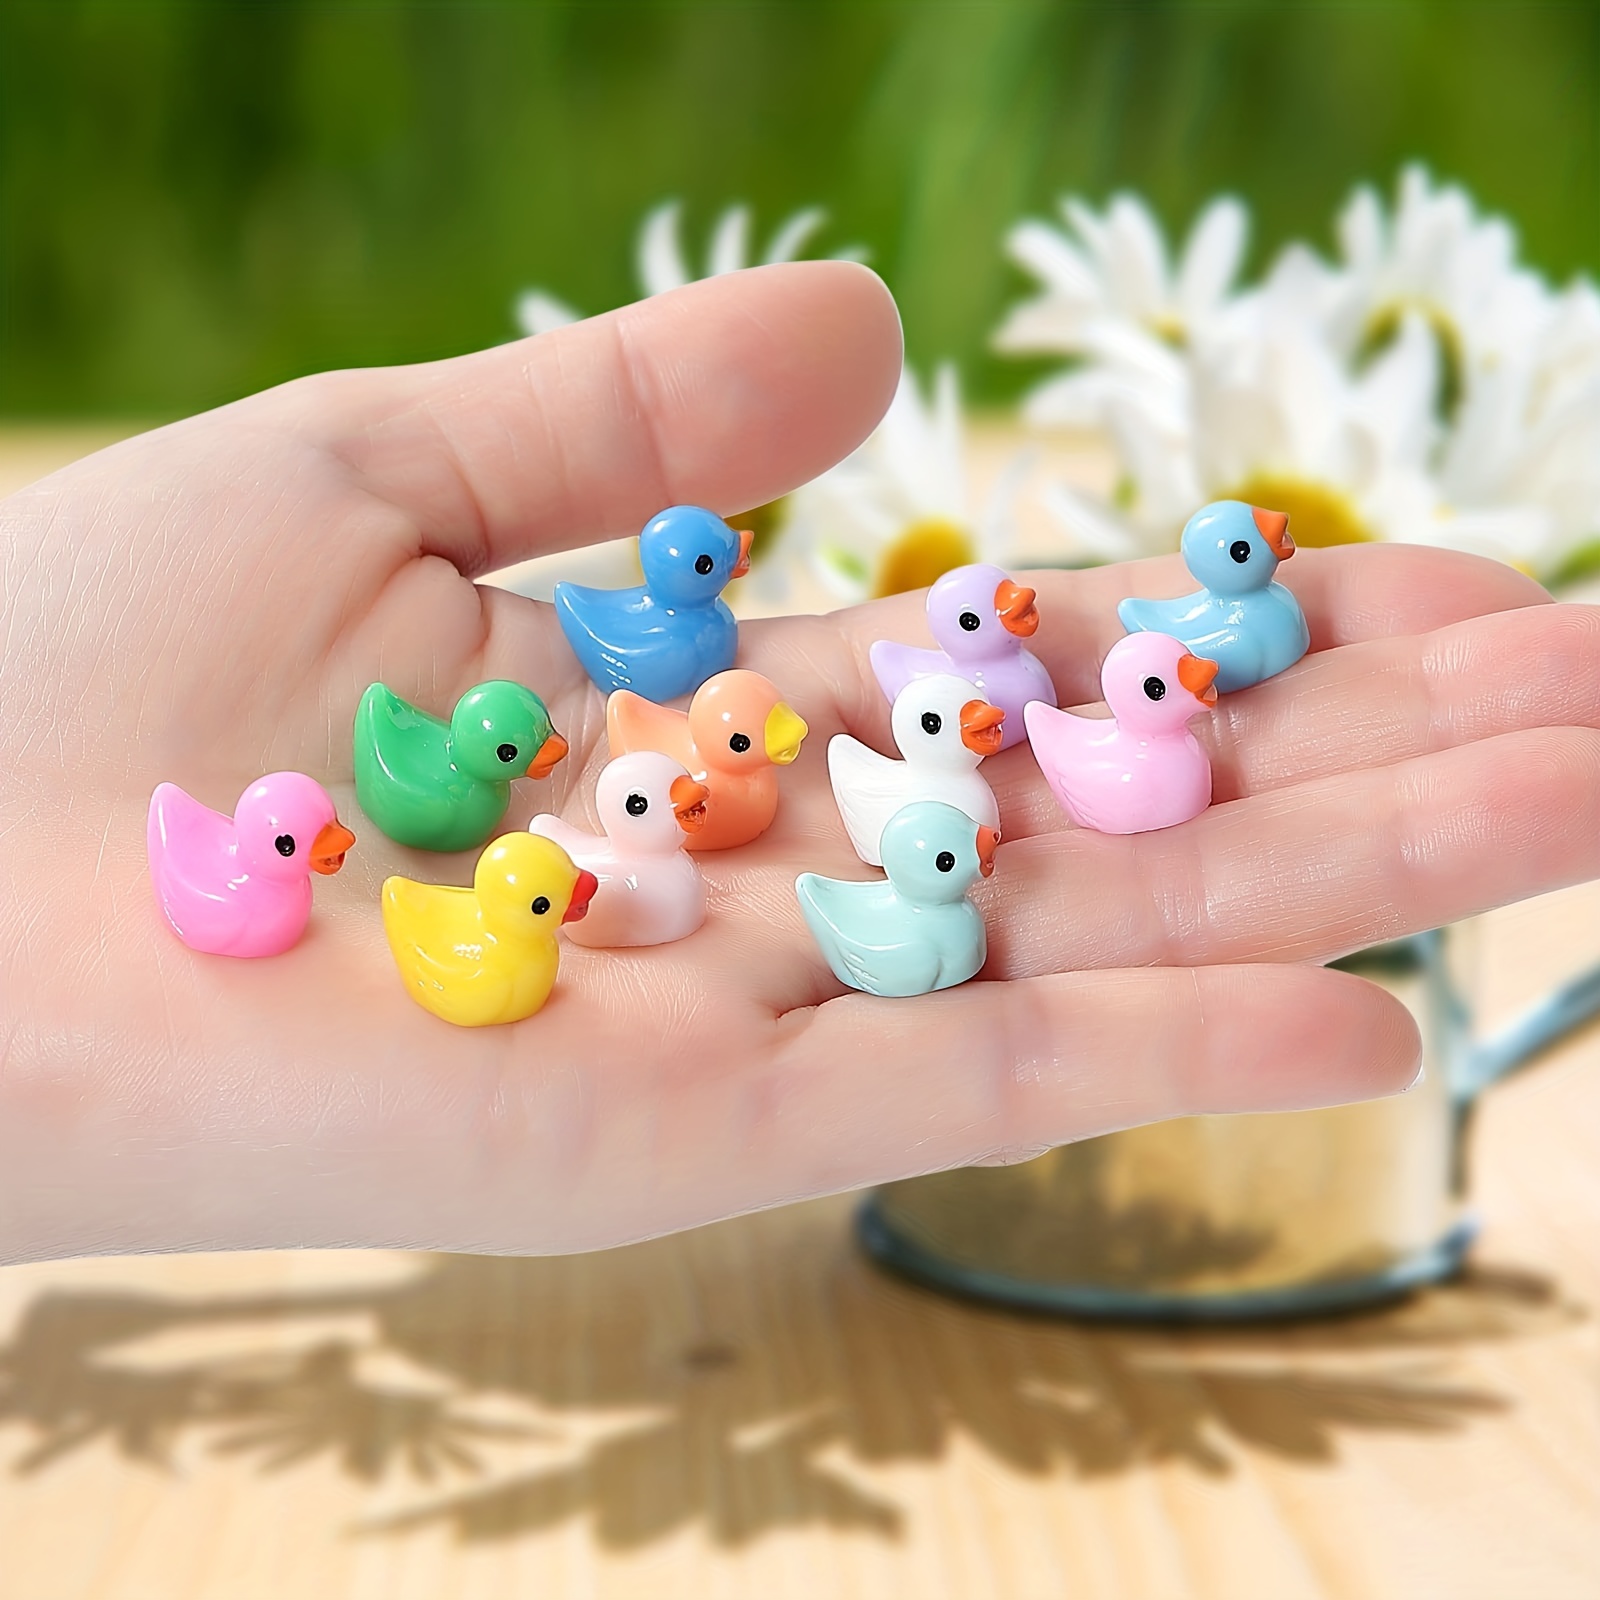 Mini Ducks - Tiny Ducks For Crafts, Duck Toy Potted Decoration Diy Charm  Dollhouse Garden Decoration For Christmas Birthday Party